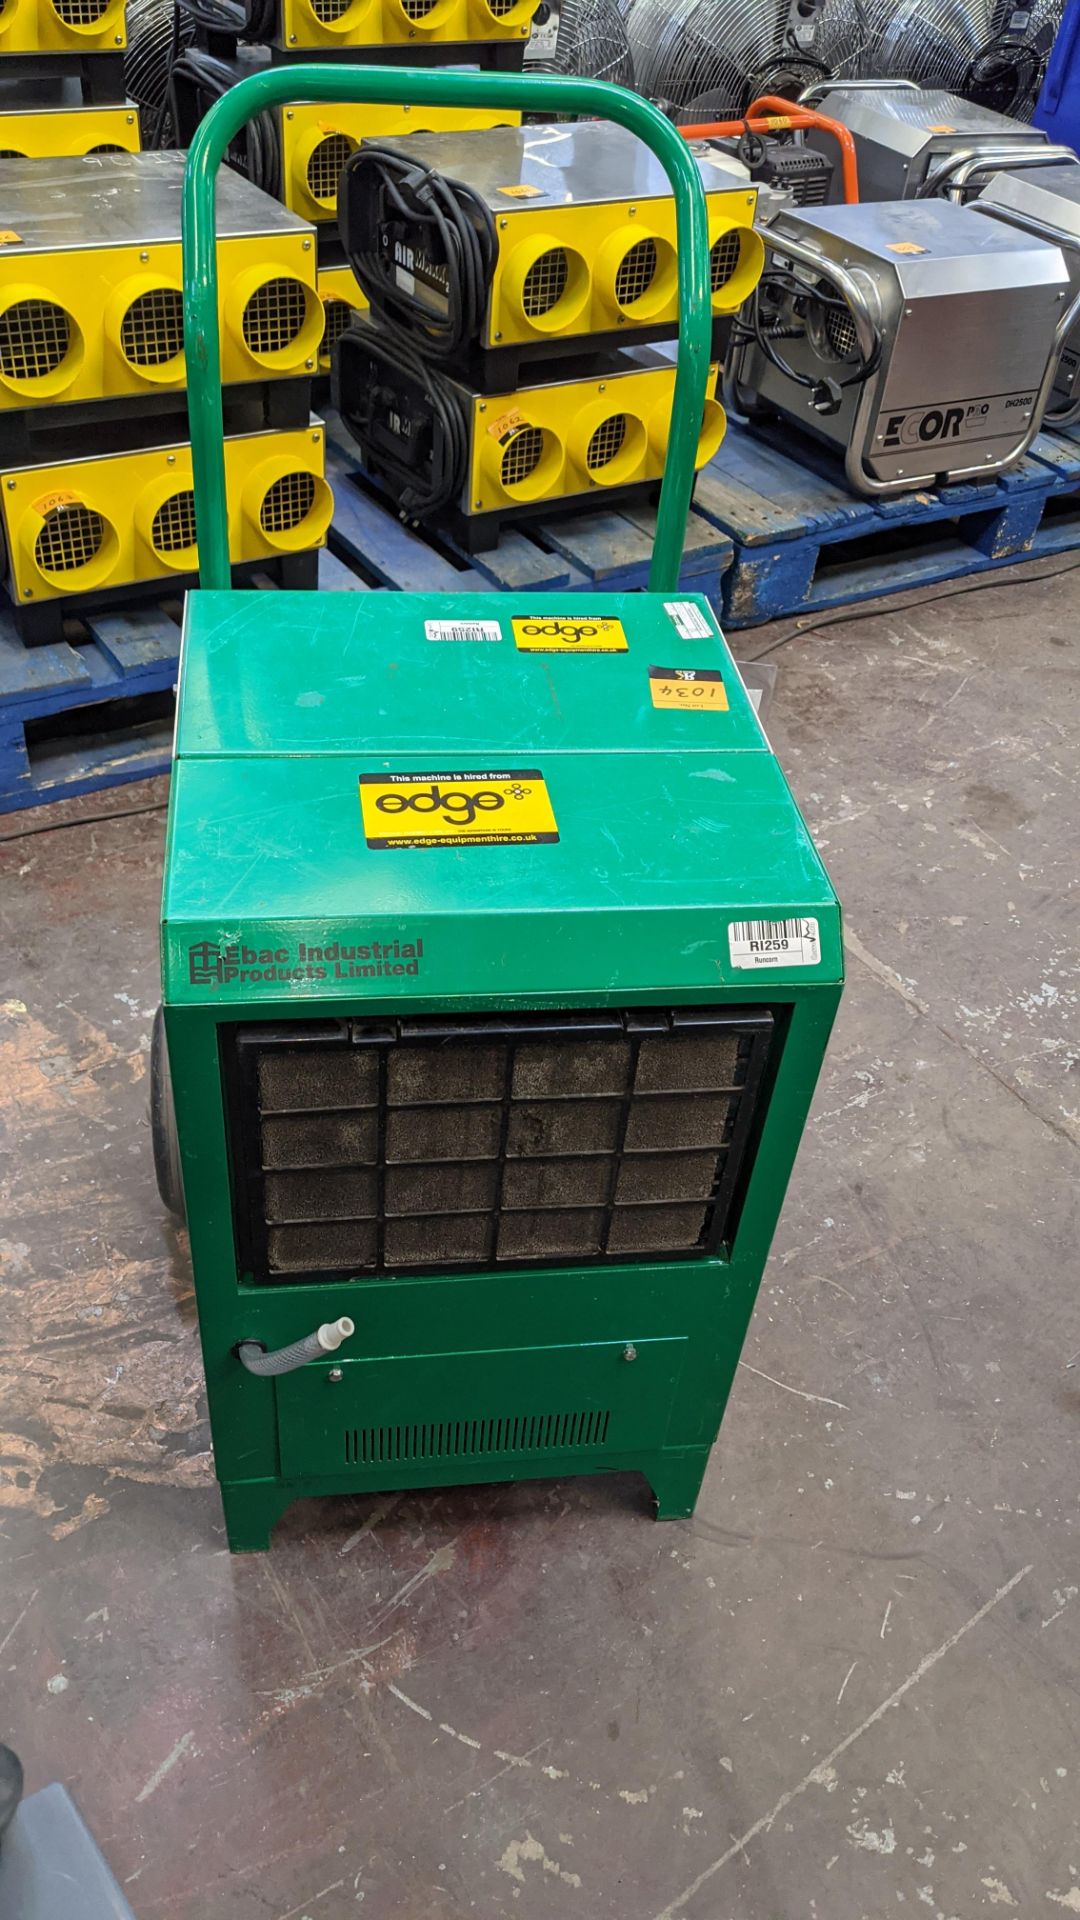 Ebac Industrial Products Limited Kompact industrial dehumidifier. 9,537 recorded hours - Image 2 of 9